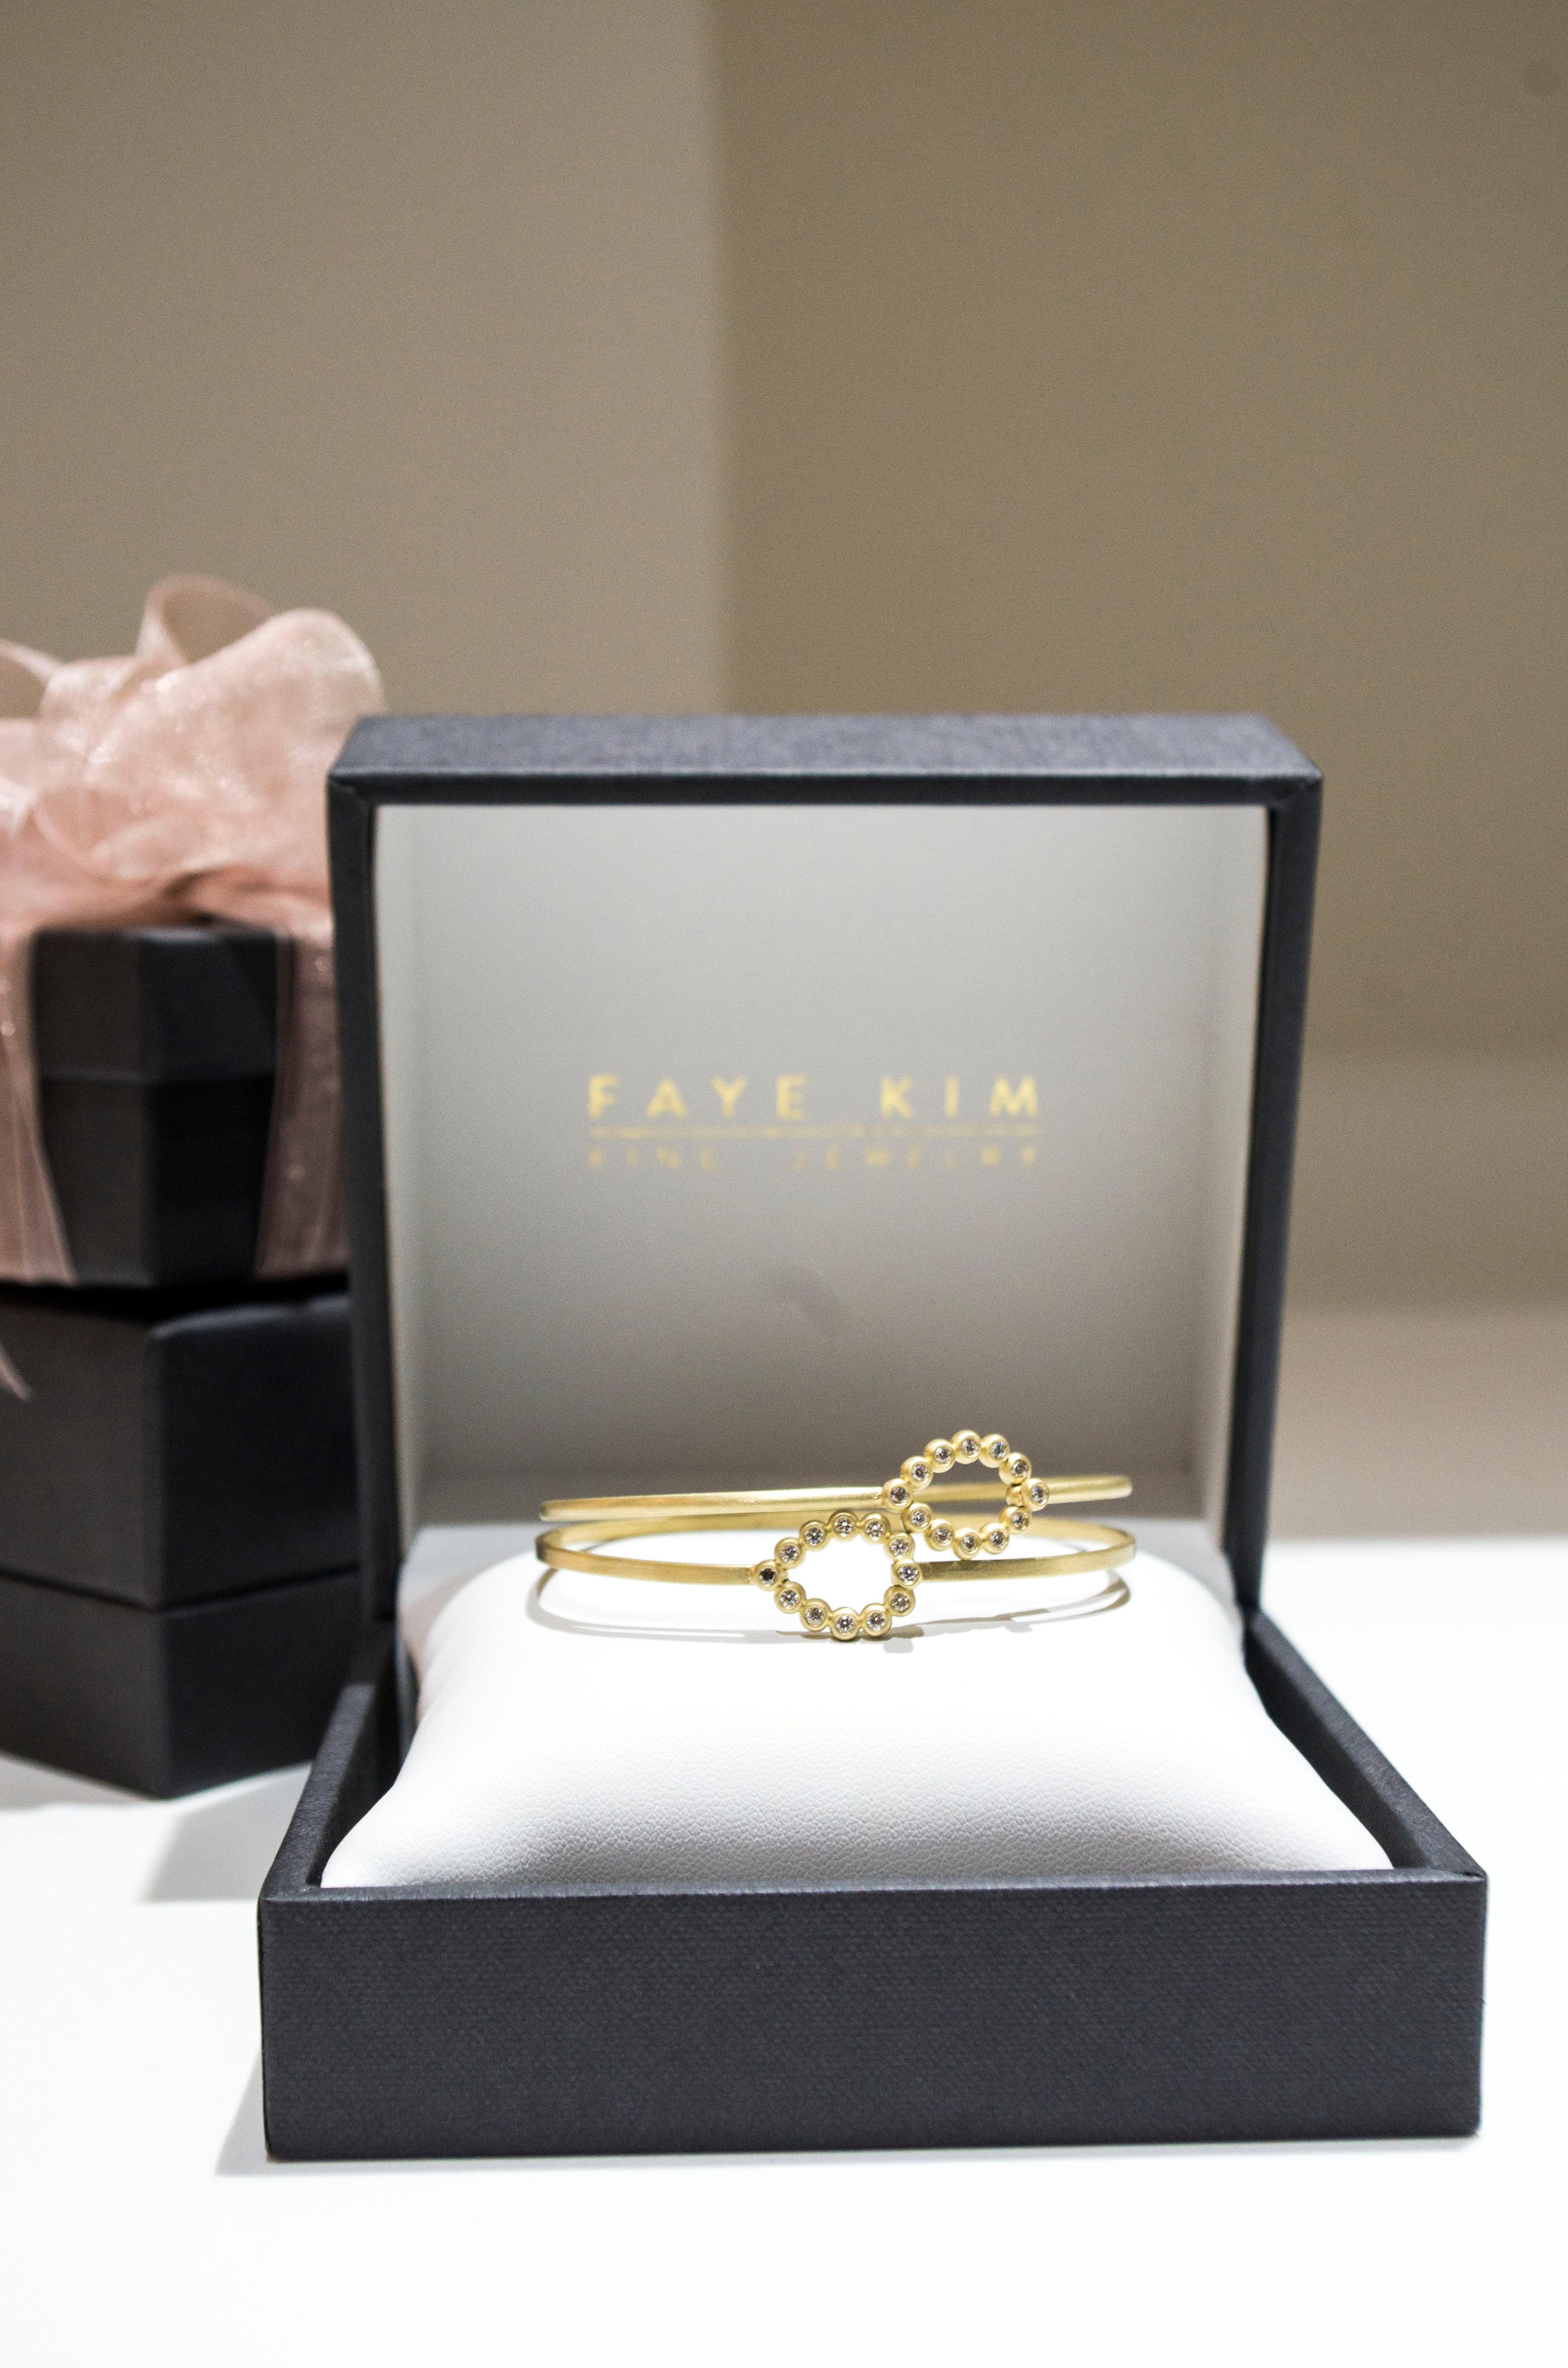 Faye Kim 18k Gold Bangle Bracelet with Diamond Tear Drop Closure In New Condition For Sale In Westport, CT